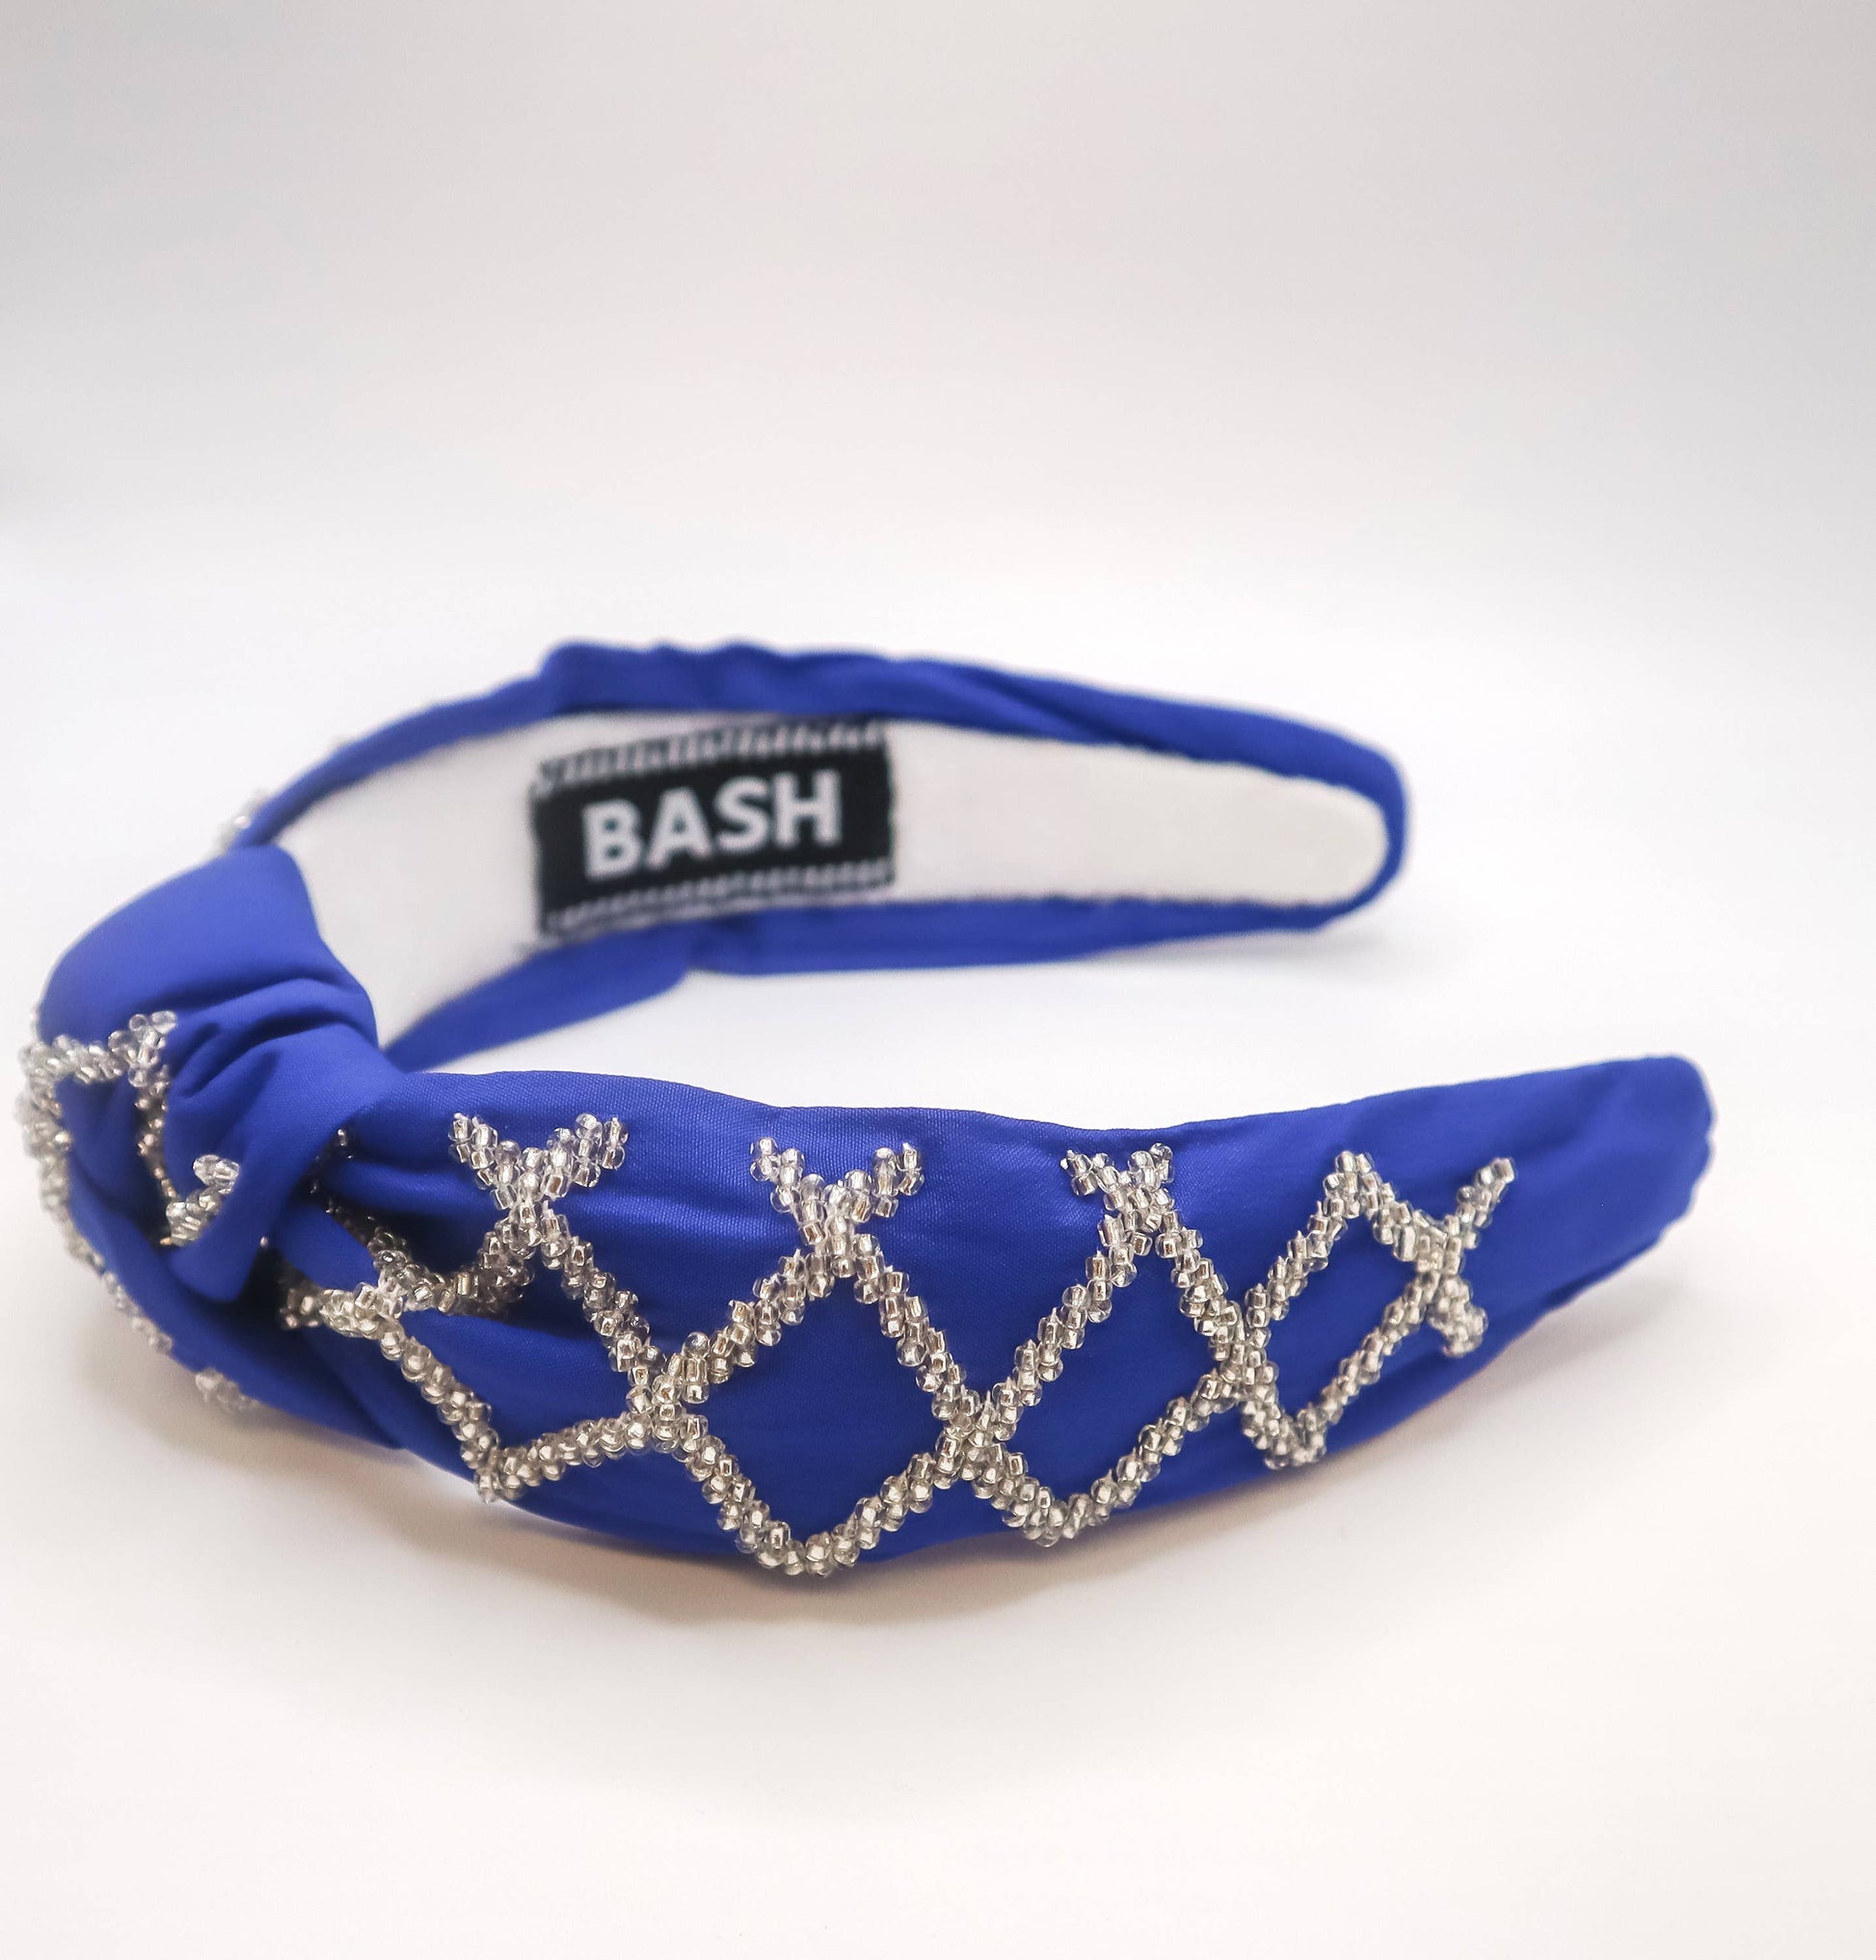 A Purple Game Day Beaded Football Headband in Purple with multiple color options, width: 6.5", height: 2.5" by Bash, perfect for game day festivities.